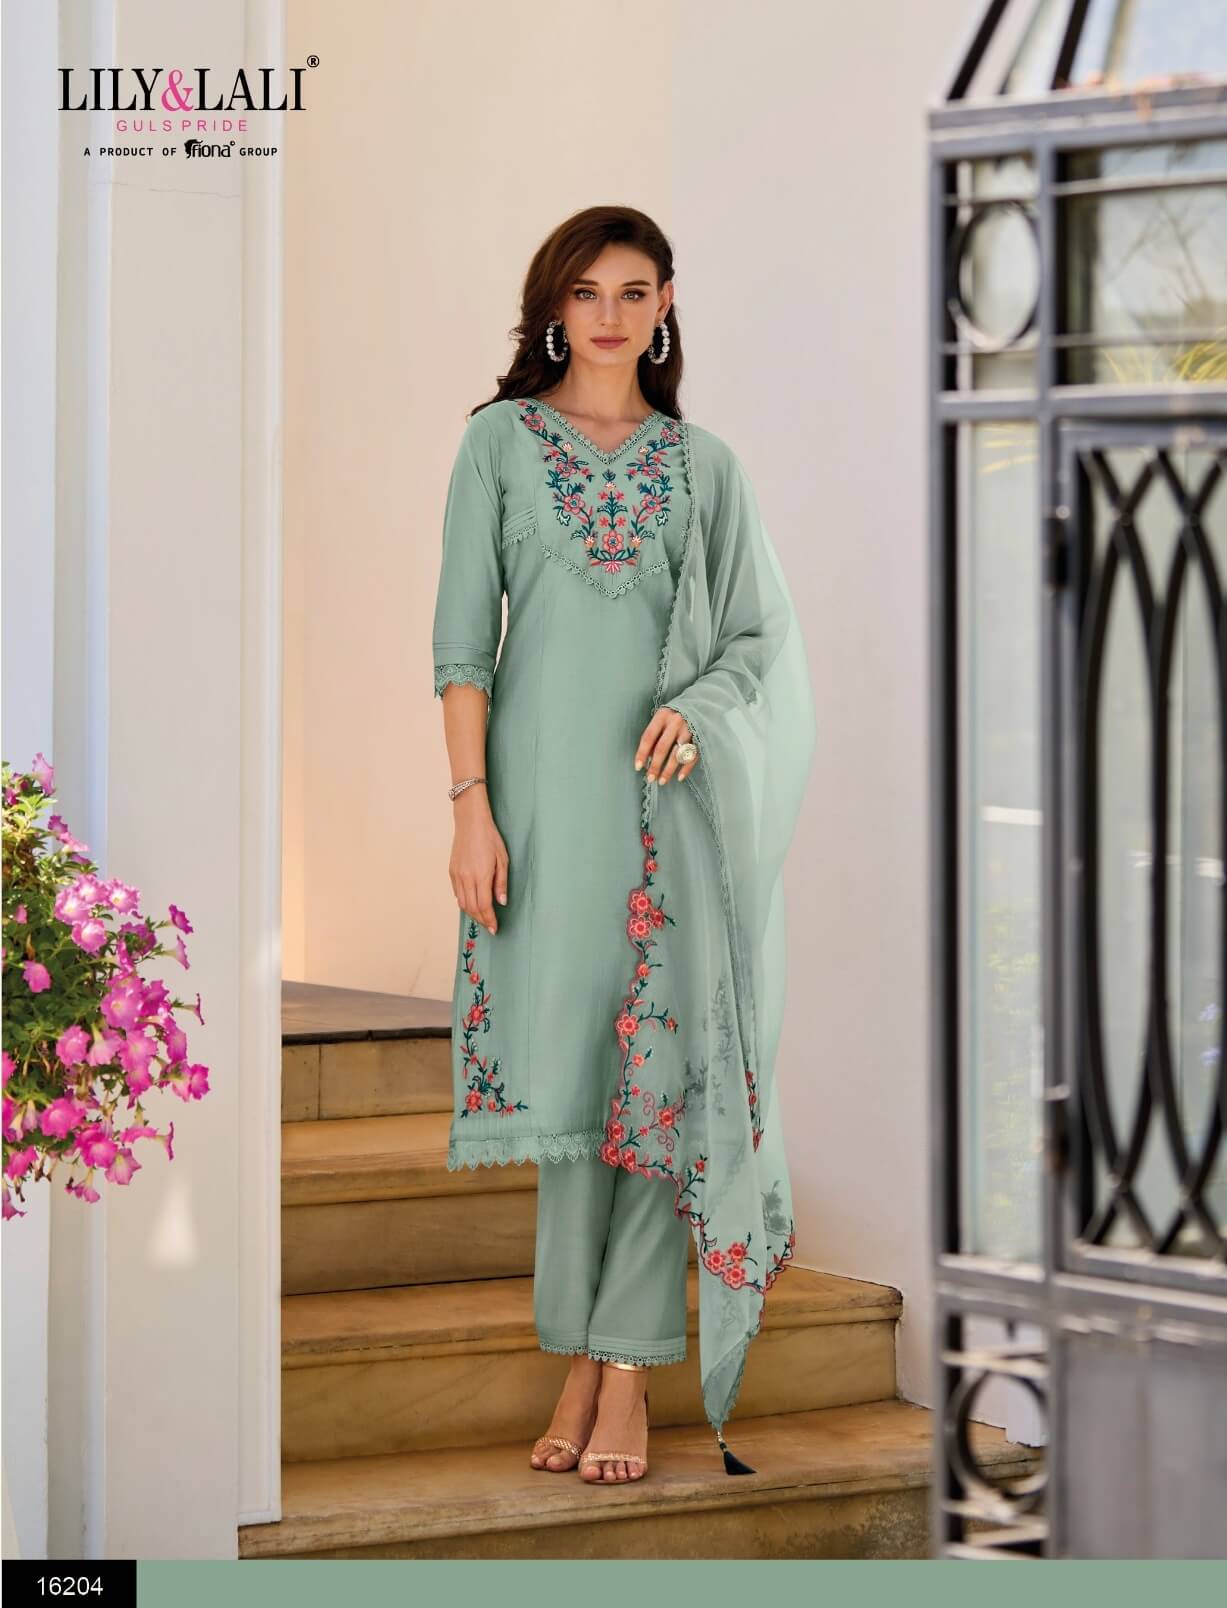 Lily And Lali Aarya Designer Embroidery Salwar Kameez Catalog collection 7